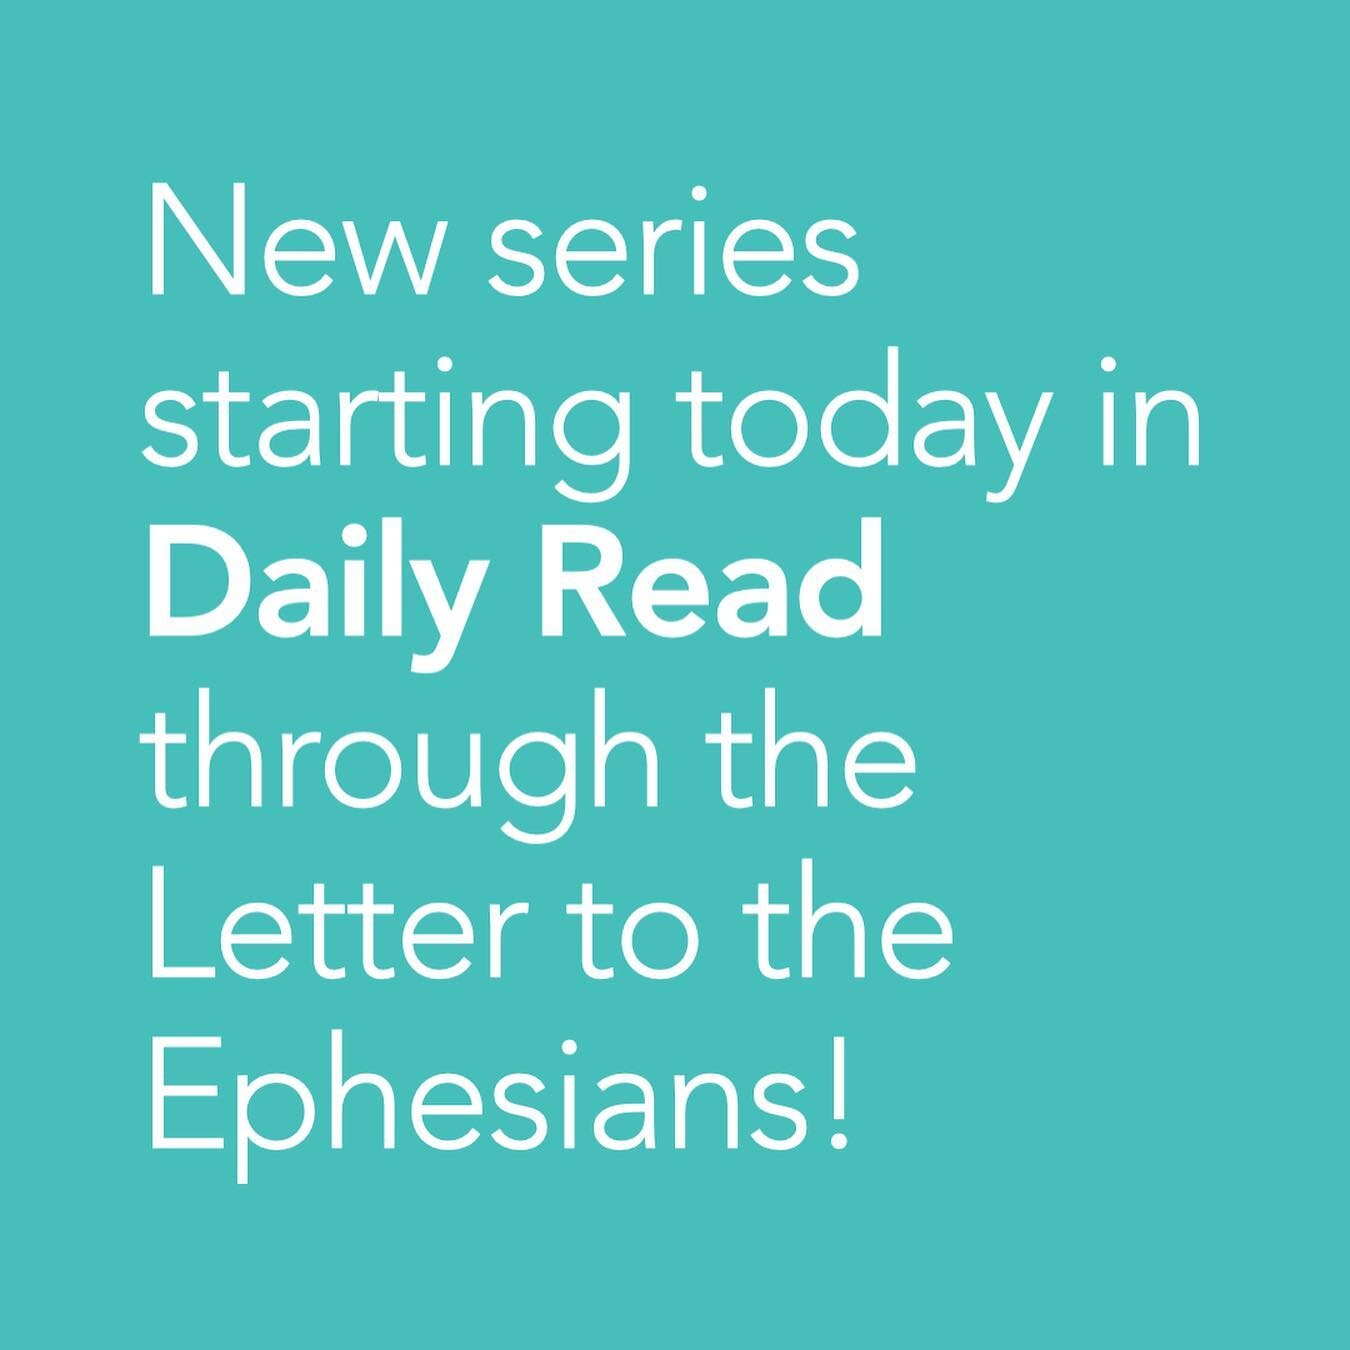 Need help getting into Scripture daily? Join us in a new series through the New Testament Prison Letters today. Listen on your favorite podcast platform or find us at anchor.fm/dailyread!